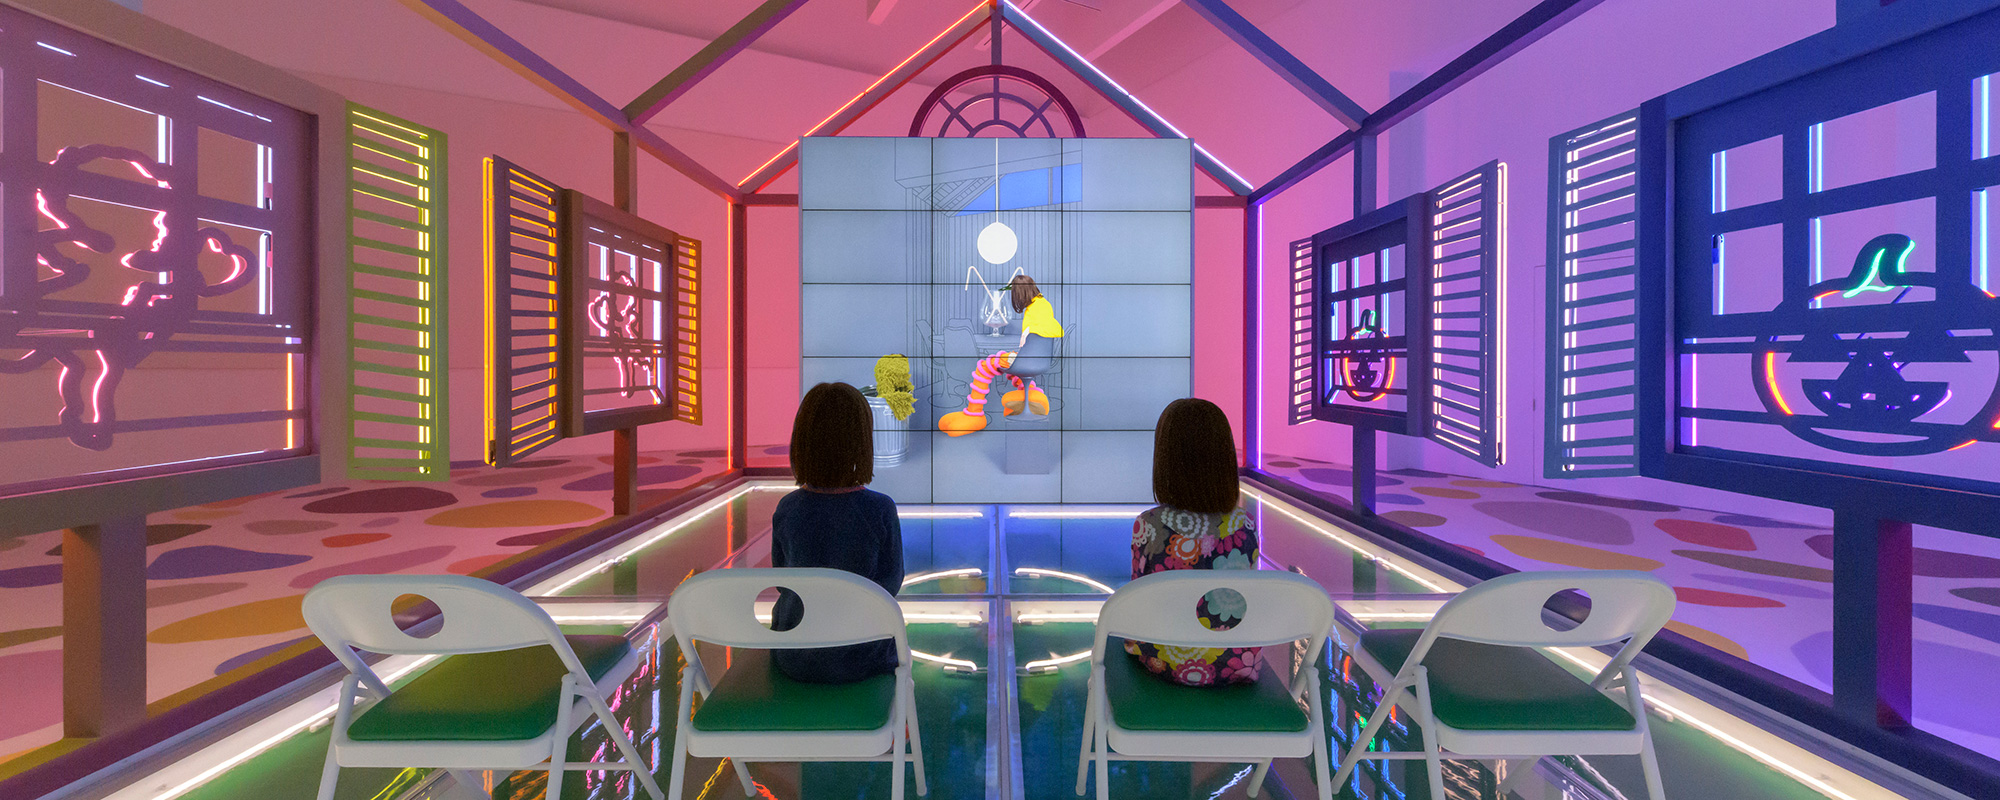 Two young girls sitting in chairs inside a neon house watching a video.